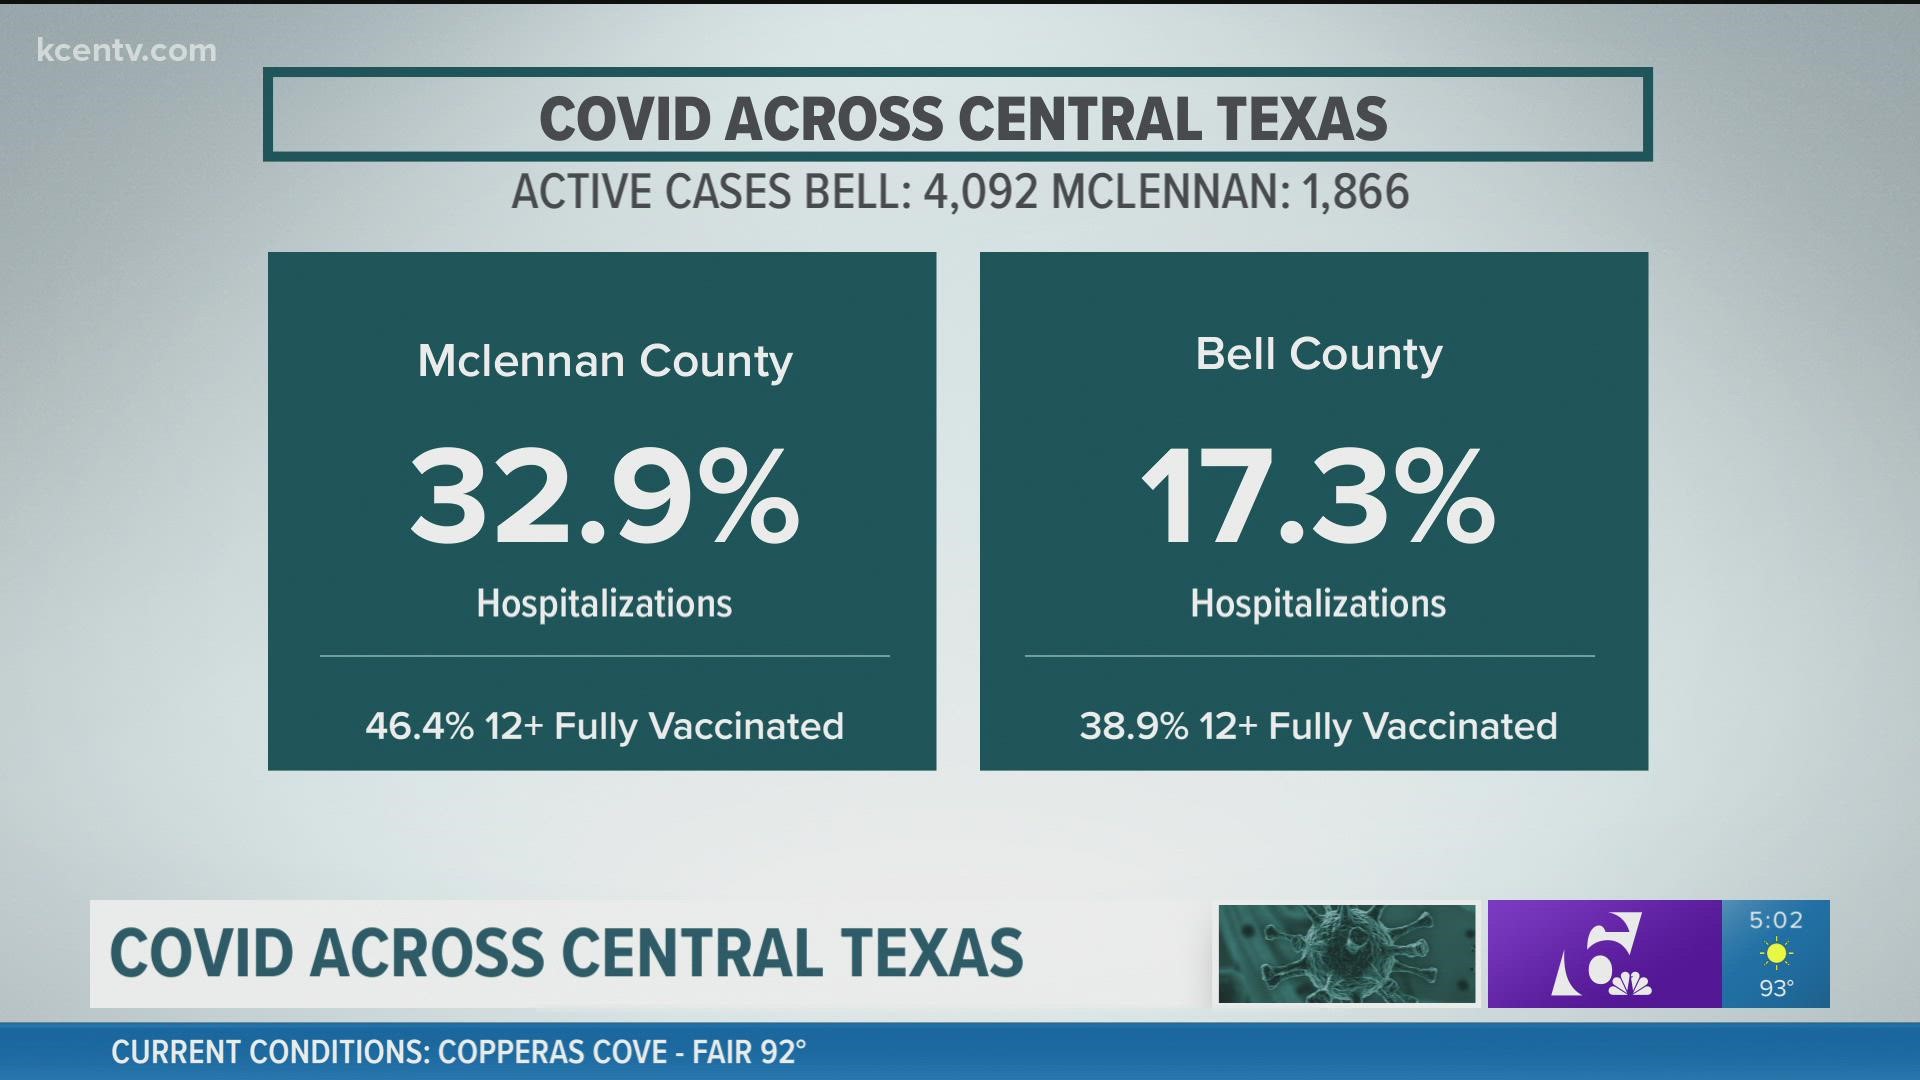 Hospitalization rates went down in the McLennan County area.